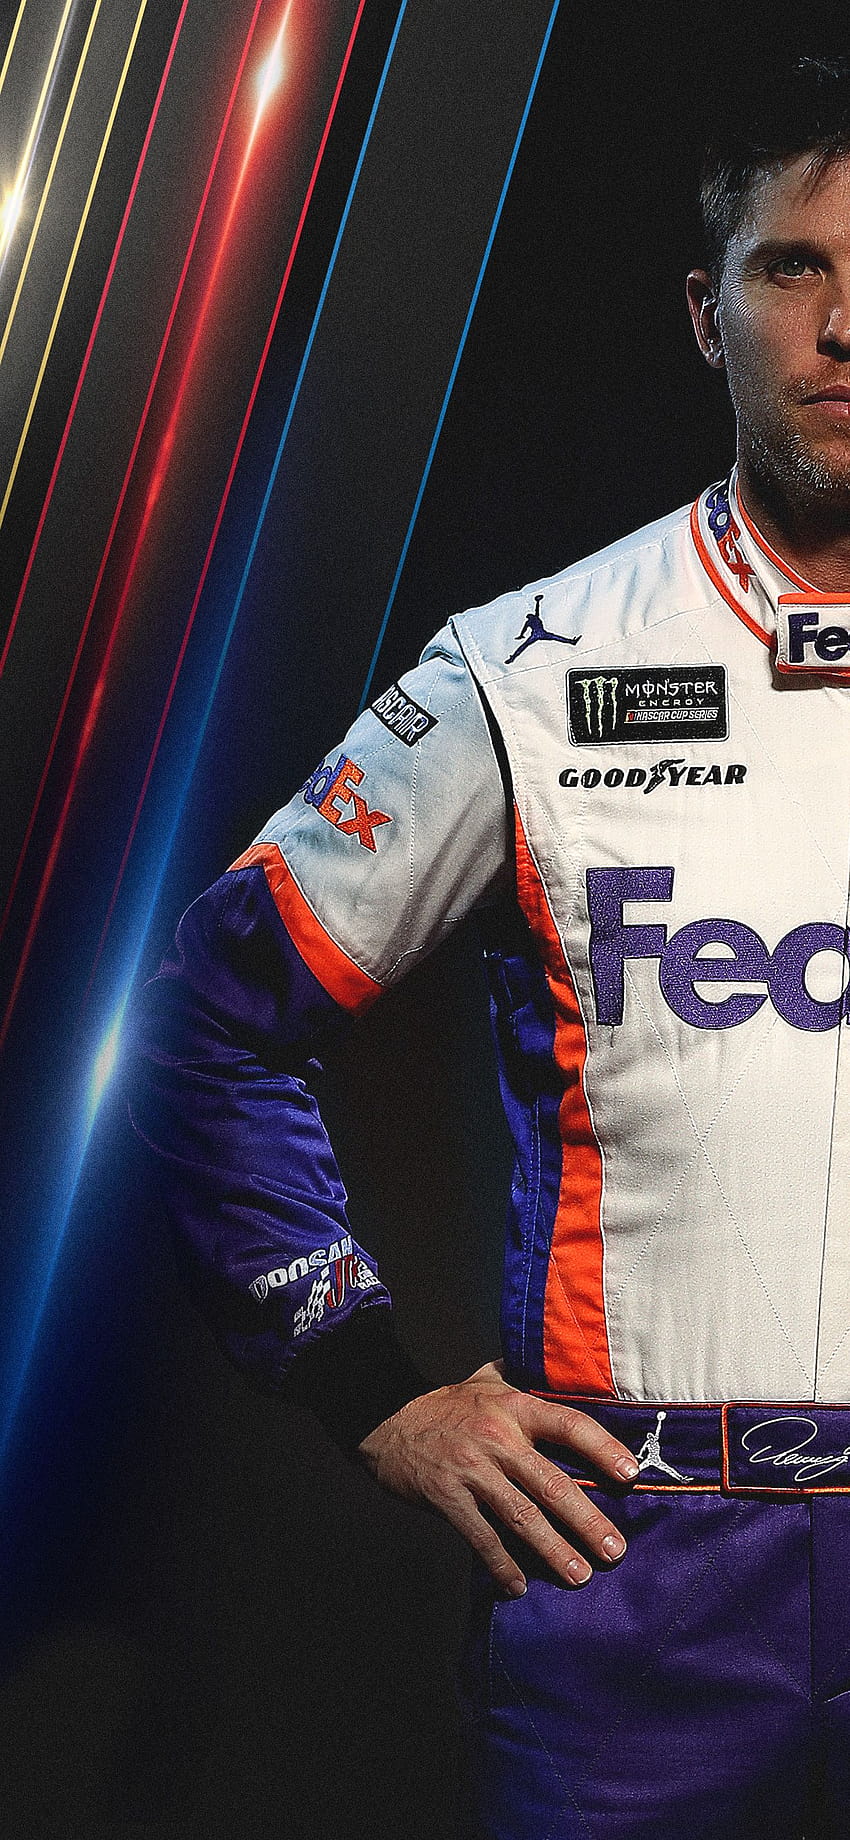 NASCAR Wallpapers on Twitter Denny Hamlin 2015 pts Denny hasnt won a  race yet this season but he led the points for much of the year and won 5  stages to get